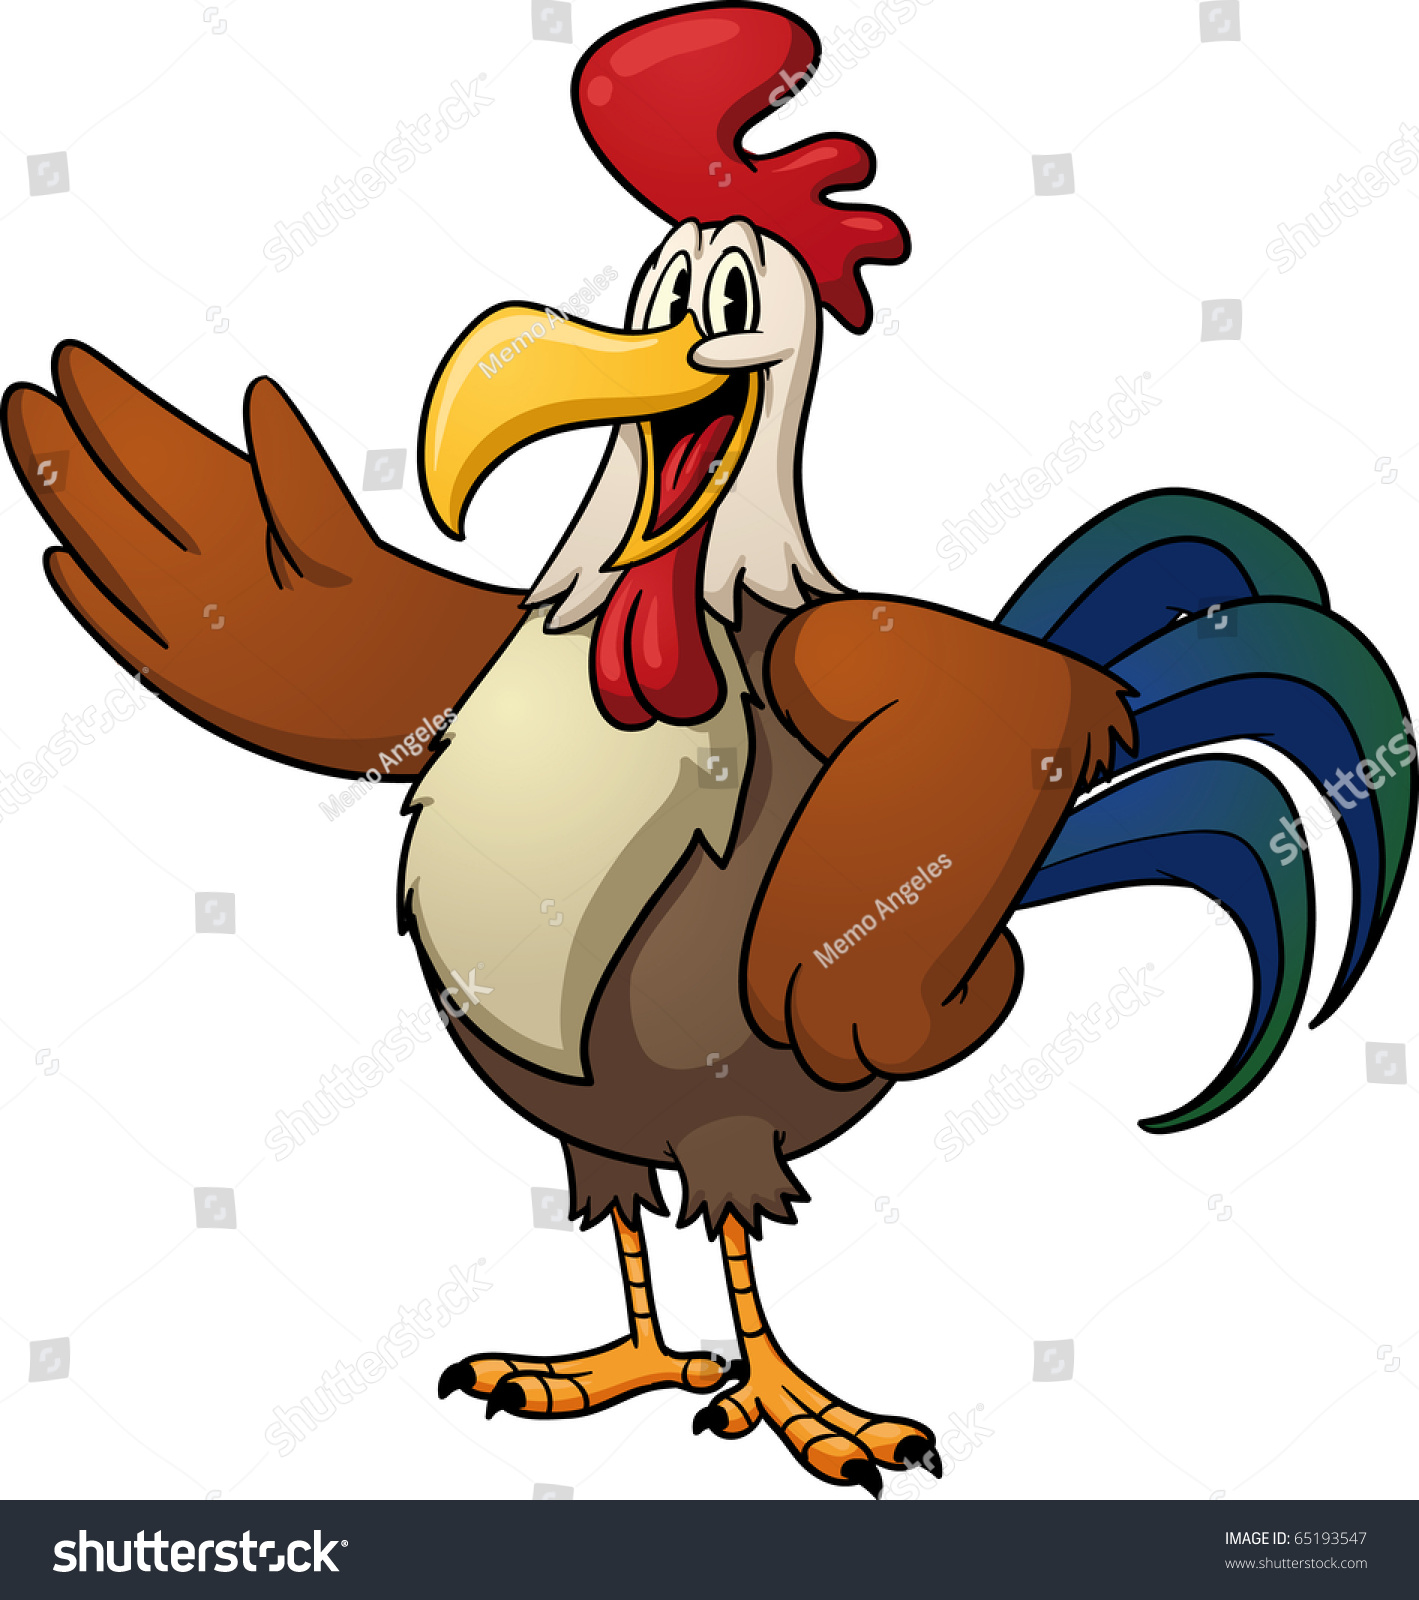 animated rooster clipart - photo #41